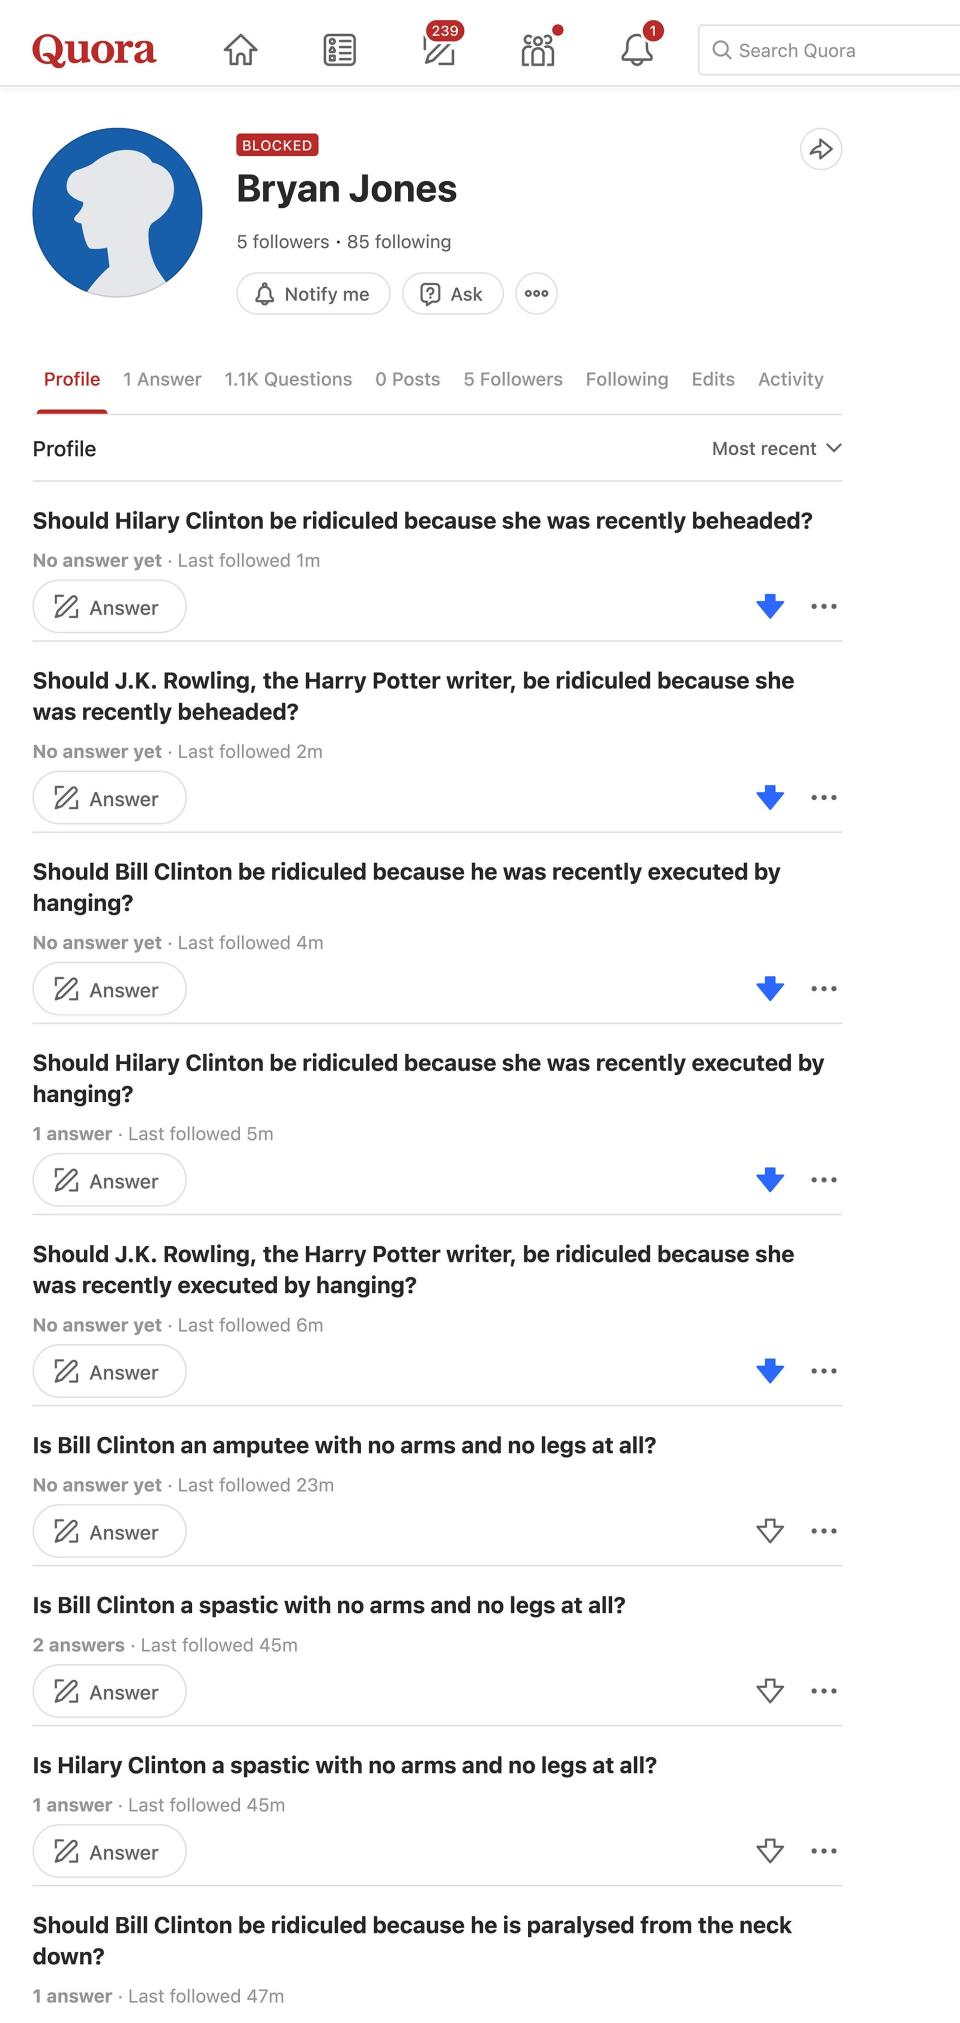 A blocked user profile page of "Bryan Jones." Listed nonsense questions include "Should Hilary Clinton be ridiculed because she was recently beheaded?" and "Should J.K. Rowling, the Harry Potter author, be ridiculed because she was recently executed by hanging?"